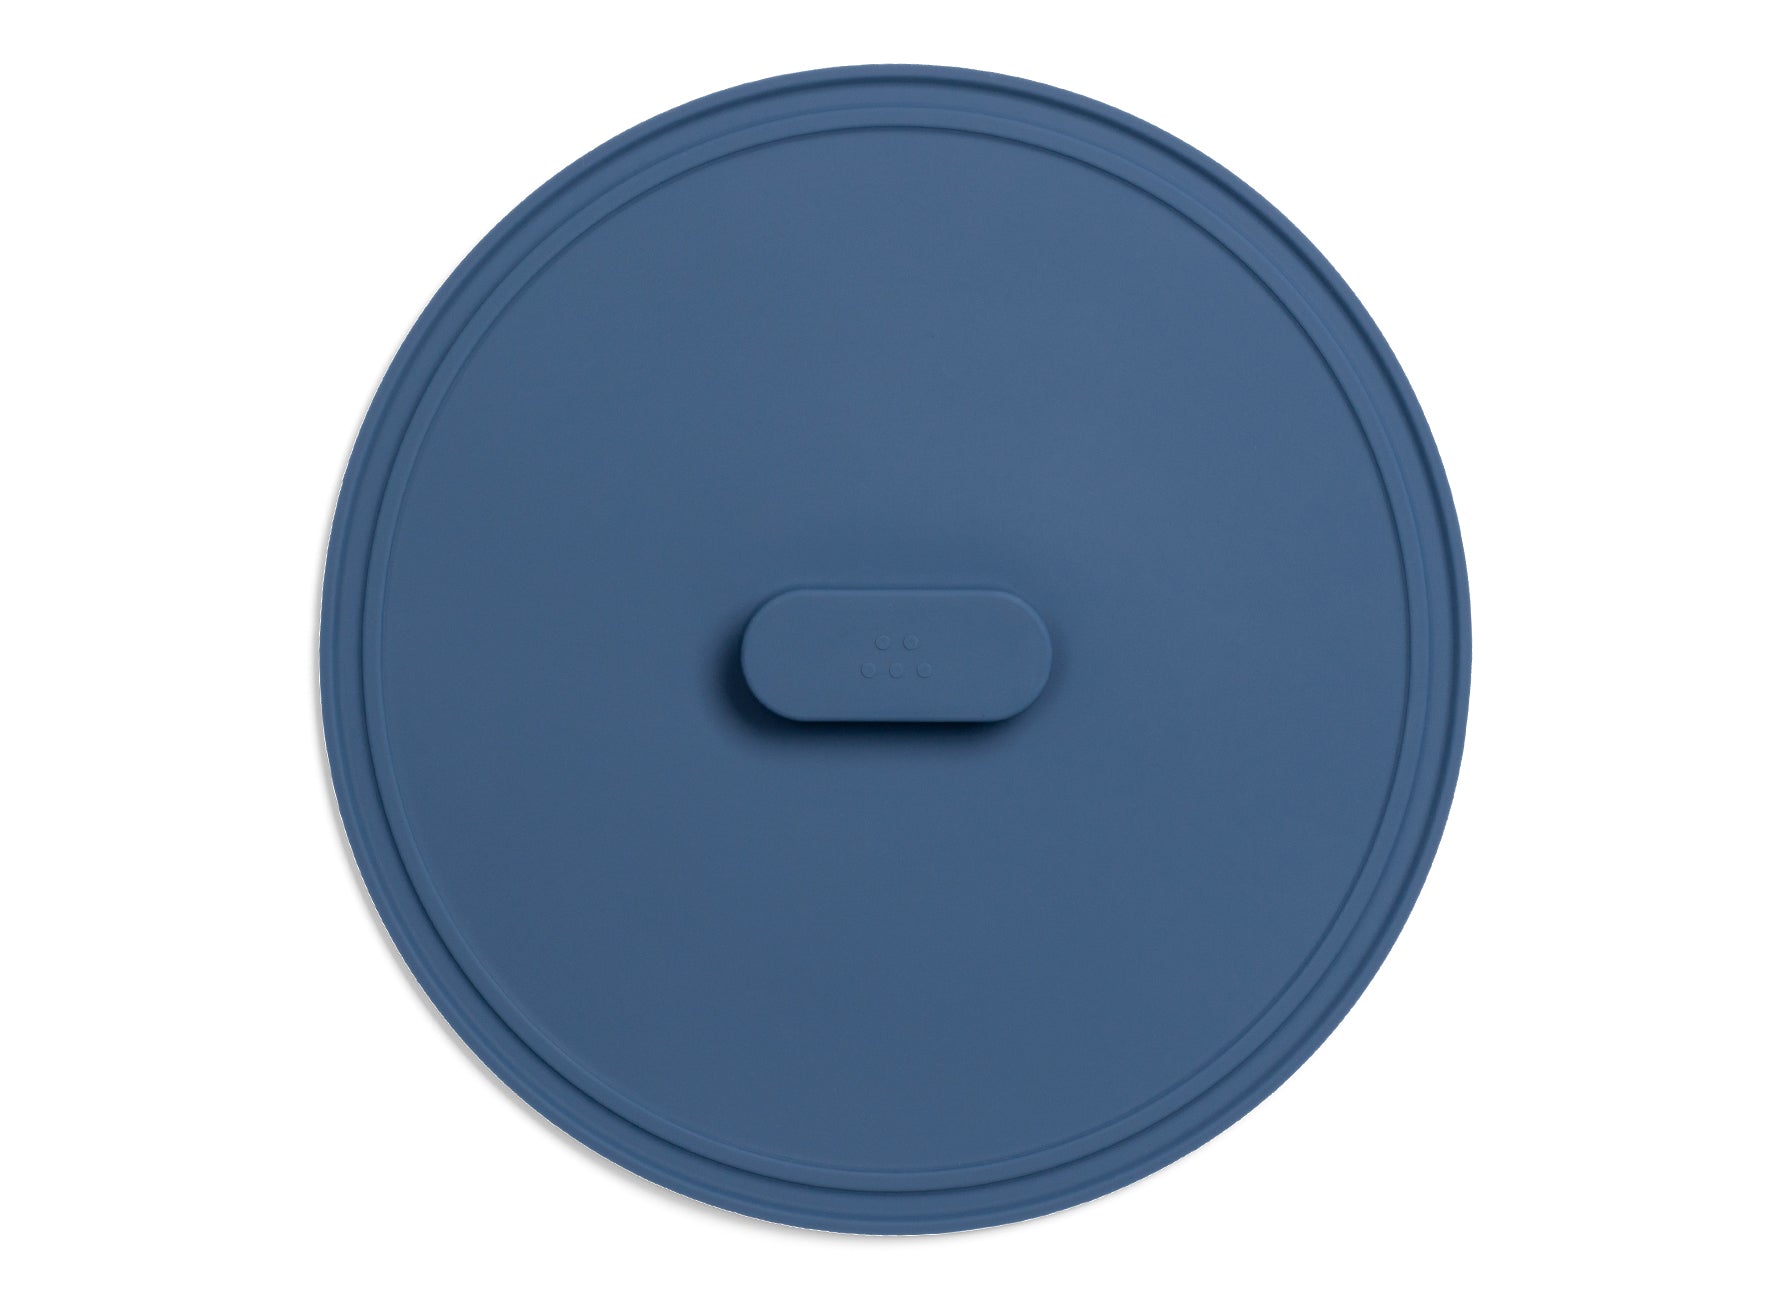 {{8-inch, 10-inch, 12-inch, 8-10-12-inch}} The 12 inch Misen Universal Lid in steel blue.